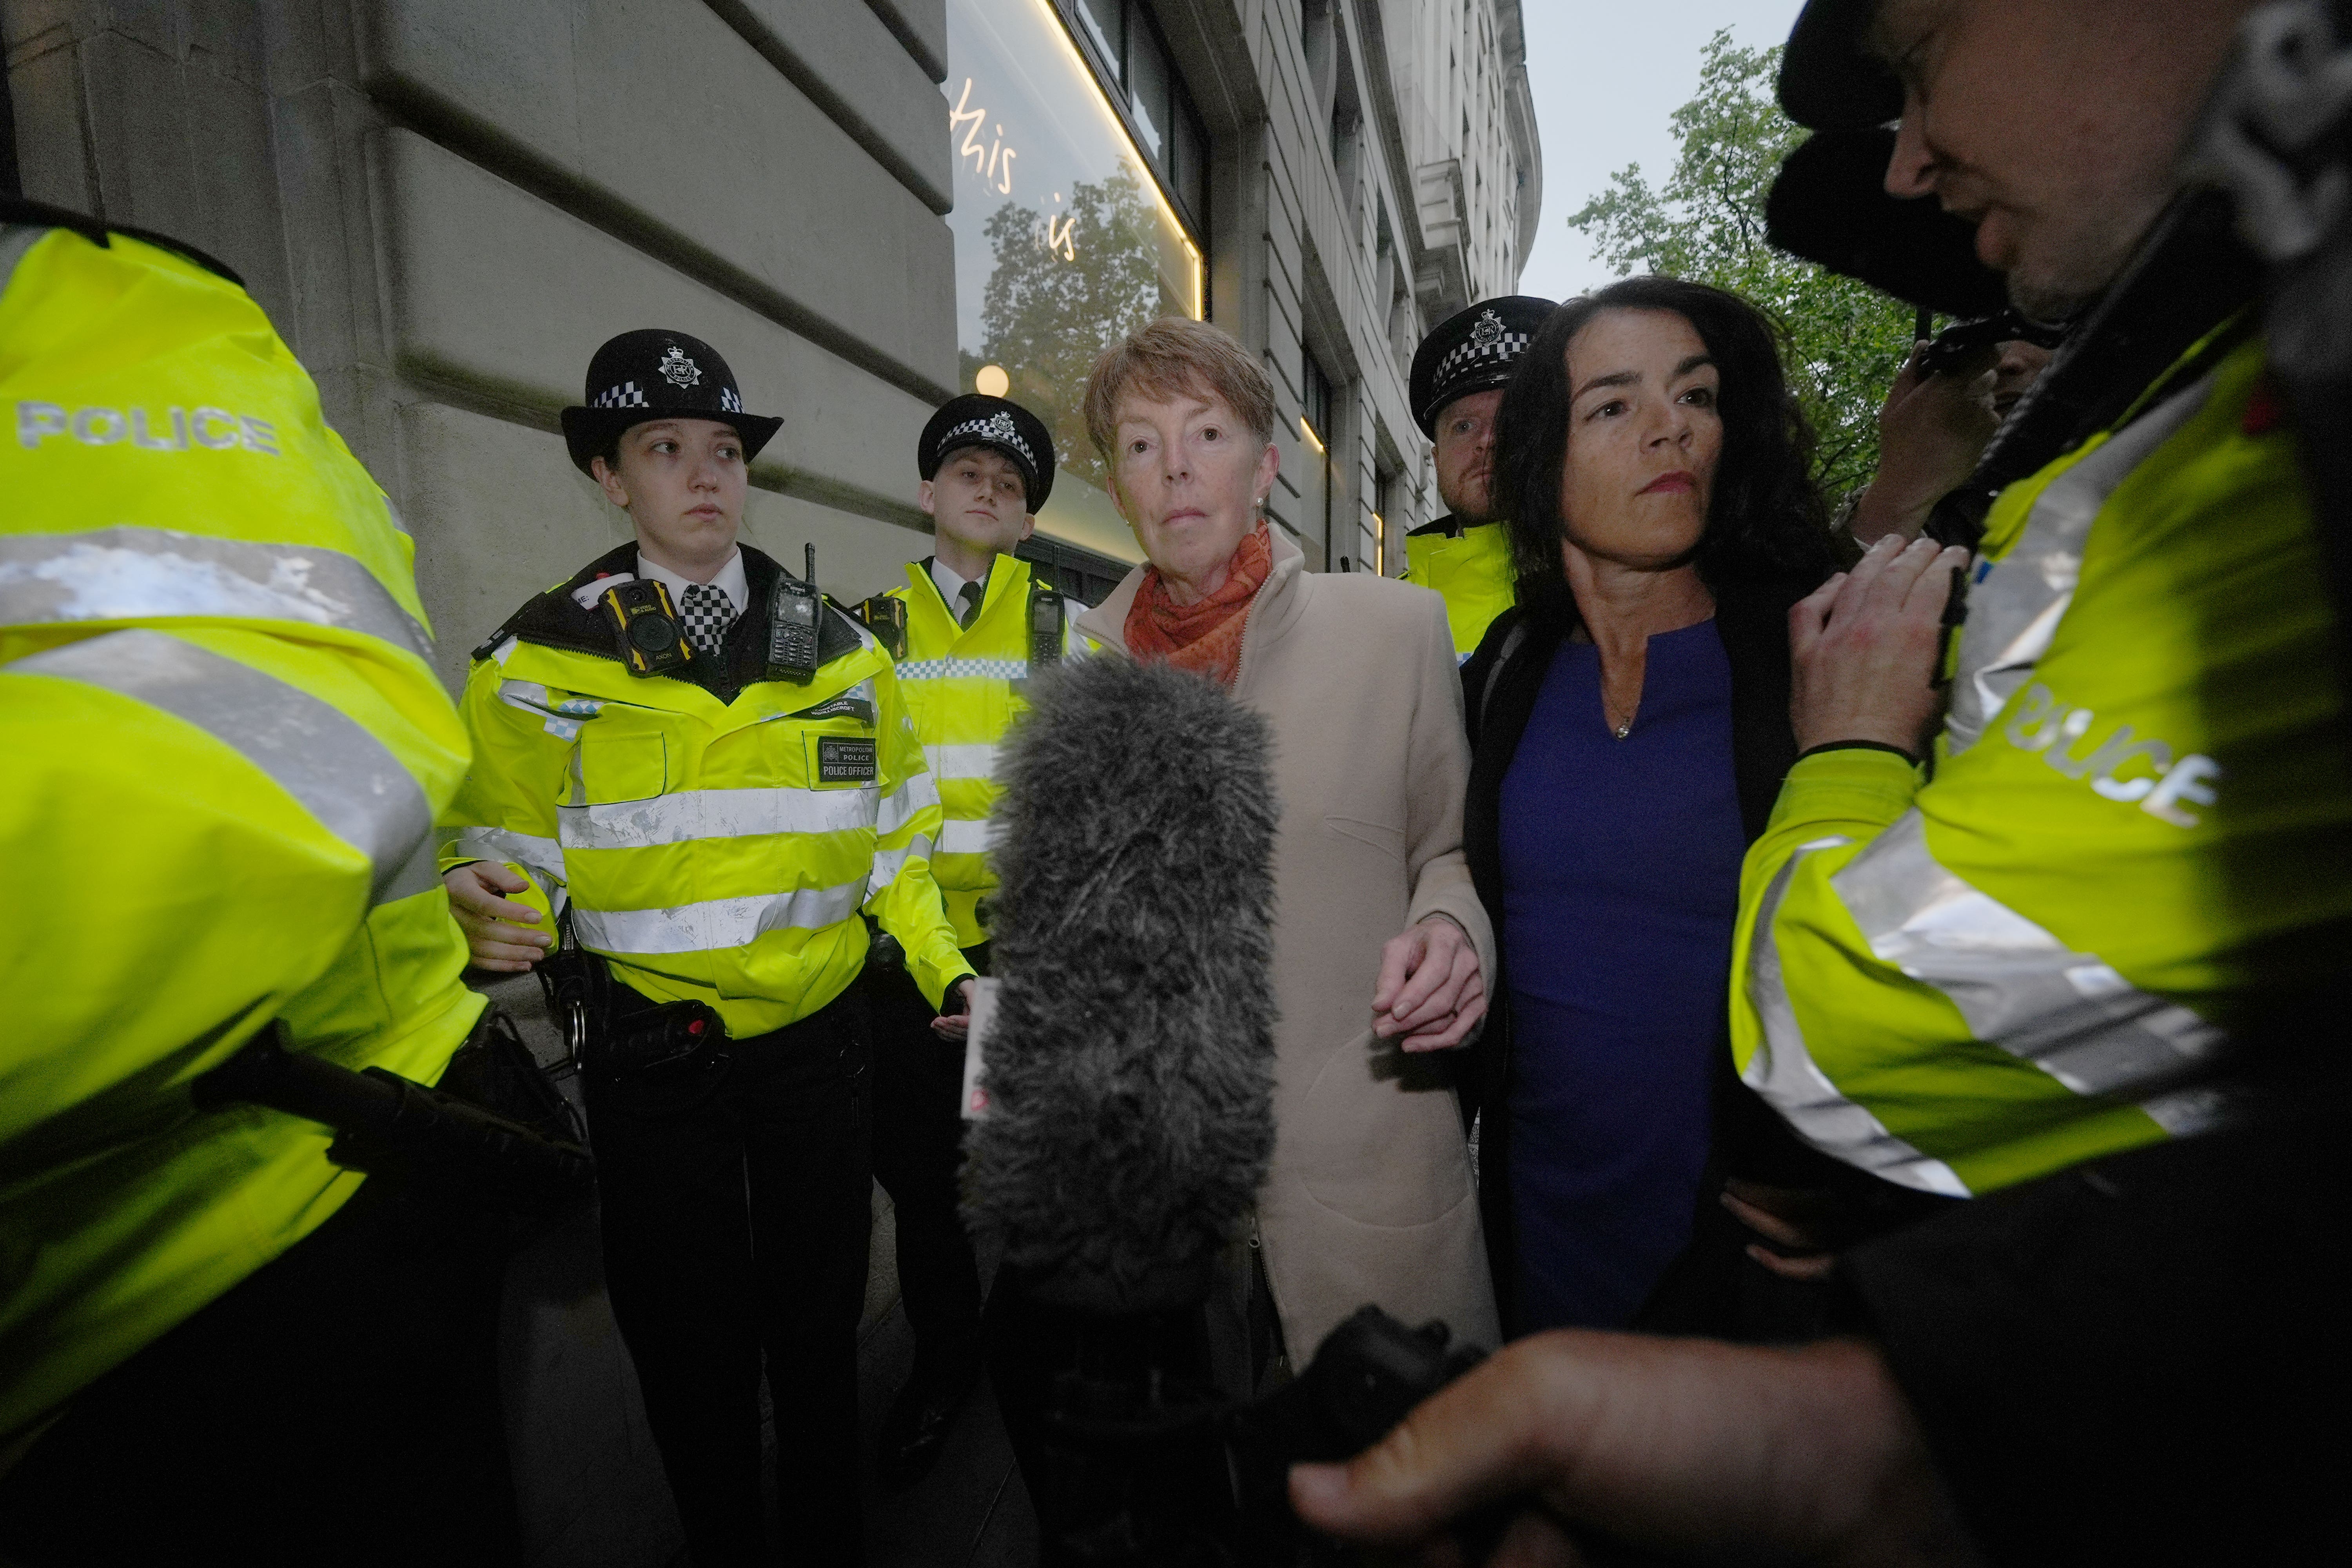 Ms Vennells was surrounded by press as she arrived at the inquiry (Yui Mok/PA)